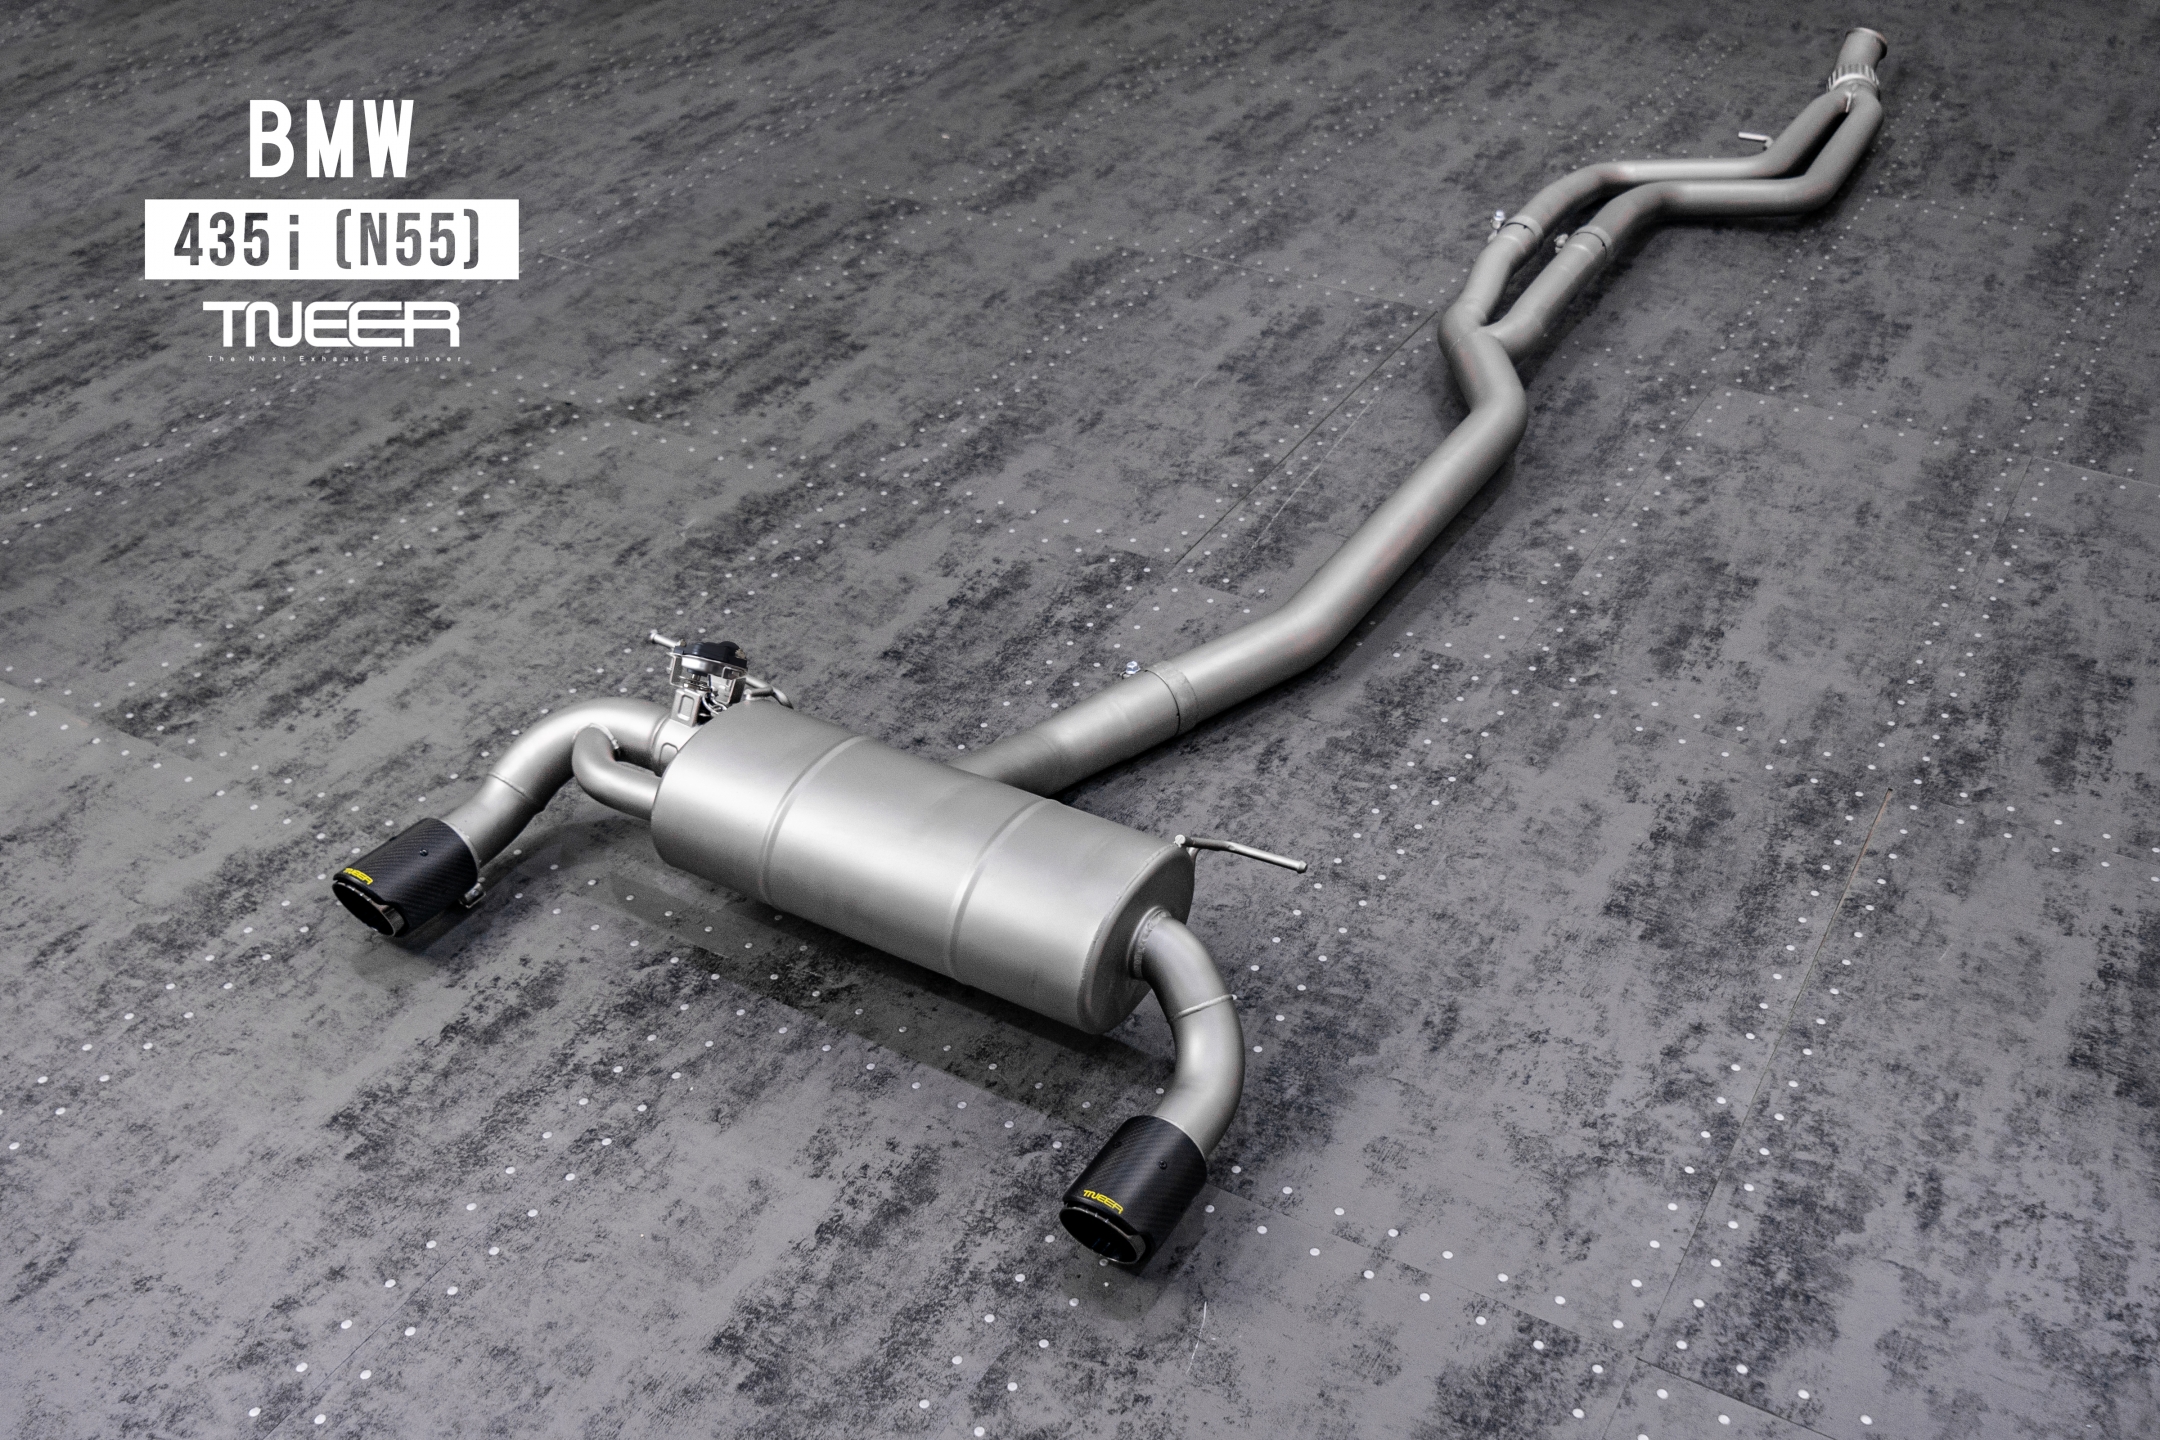 Audi A4 (B9) 2.0T TNEER Exhaust System with TACS